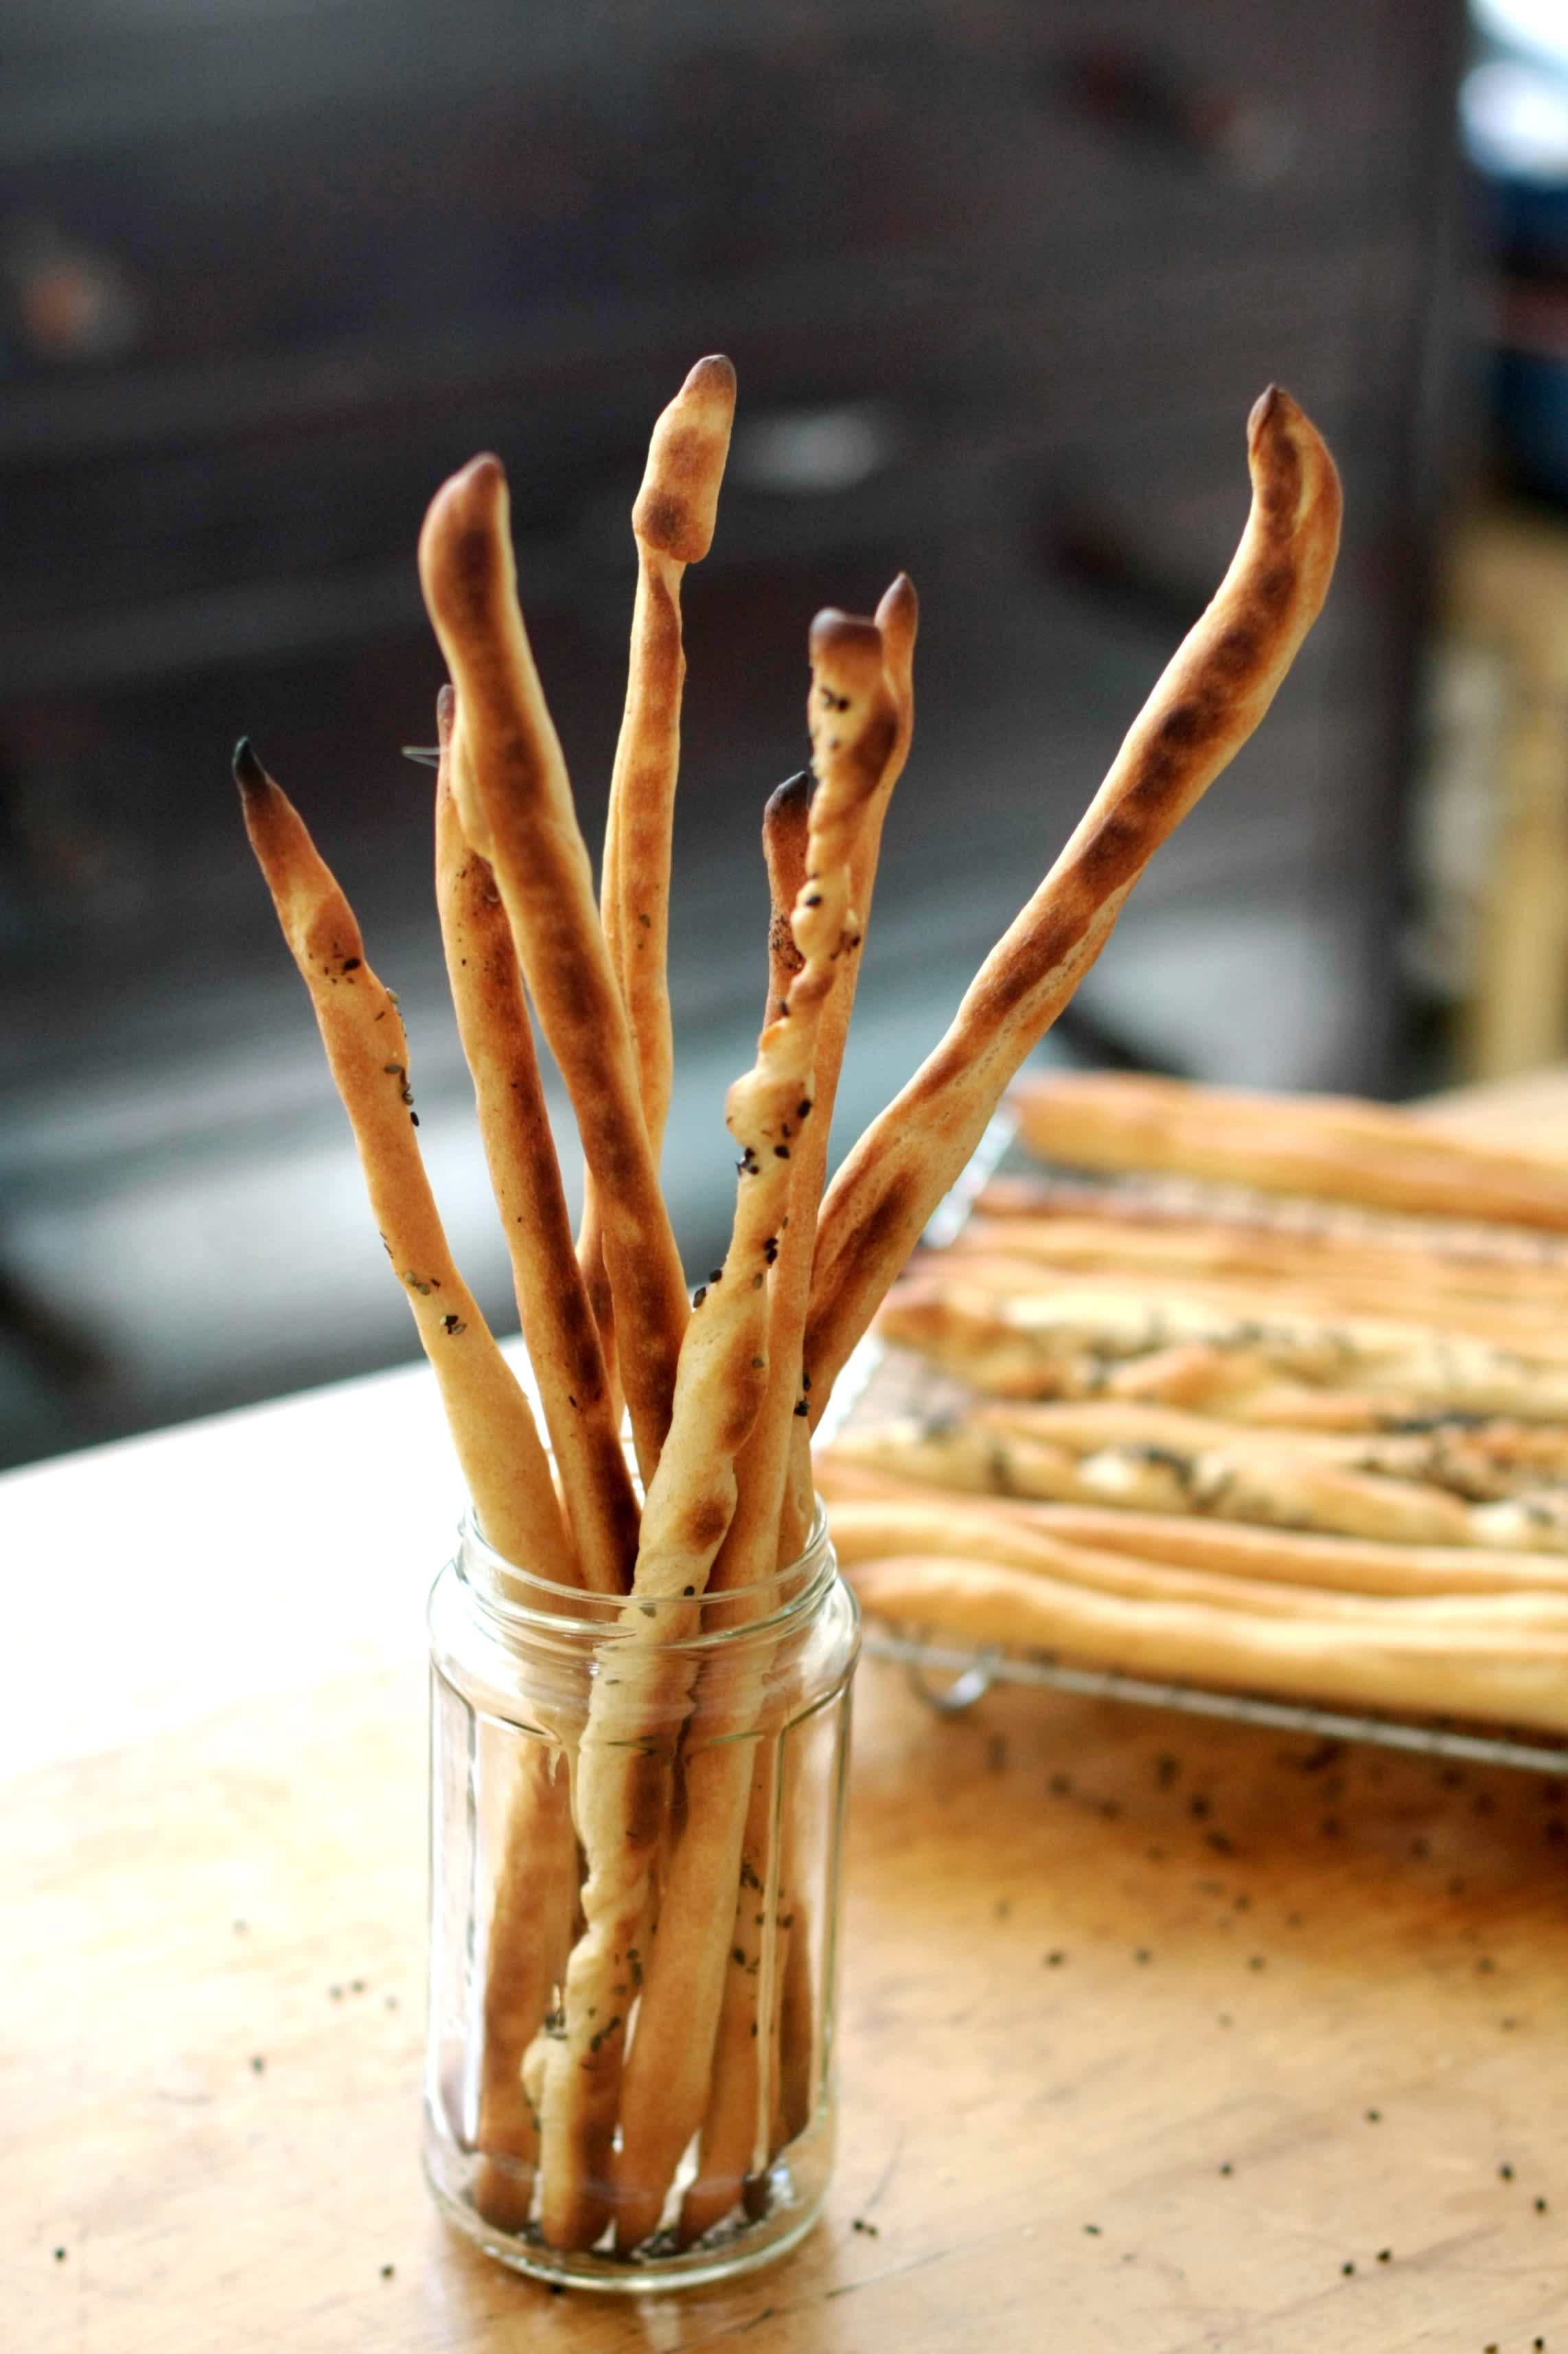 Grissini Breadsticks Recipe (With The | Fresh Herbs) Kitchn